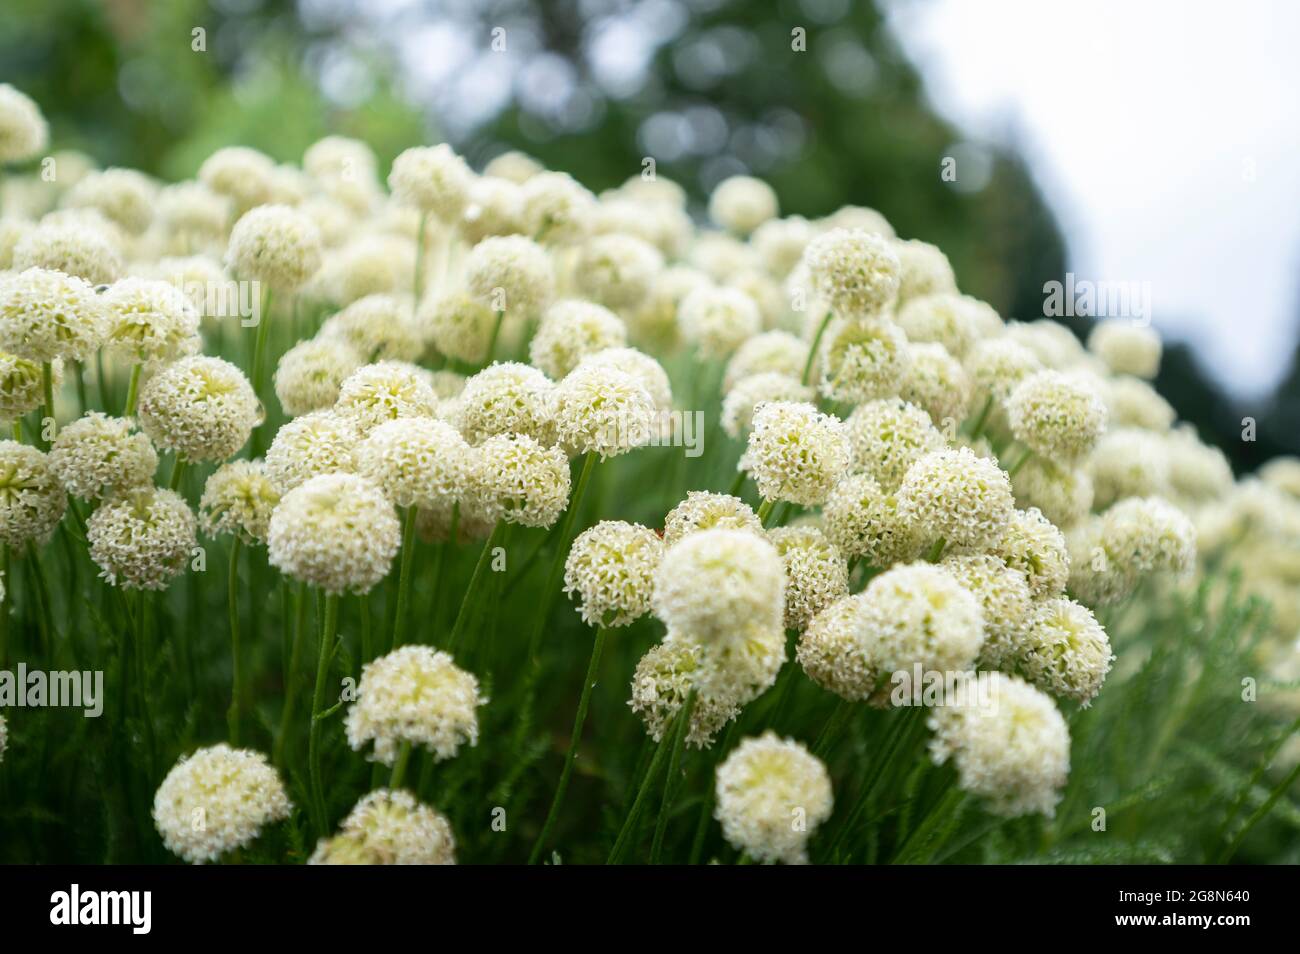 small white flower clusters with green stems 2G8N640